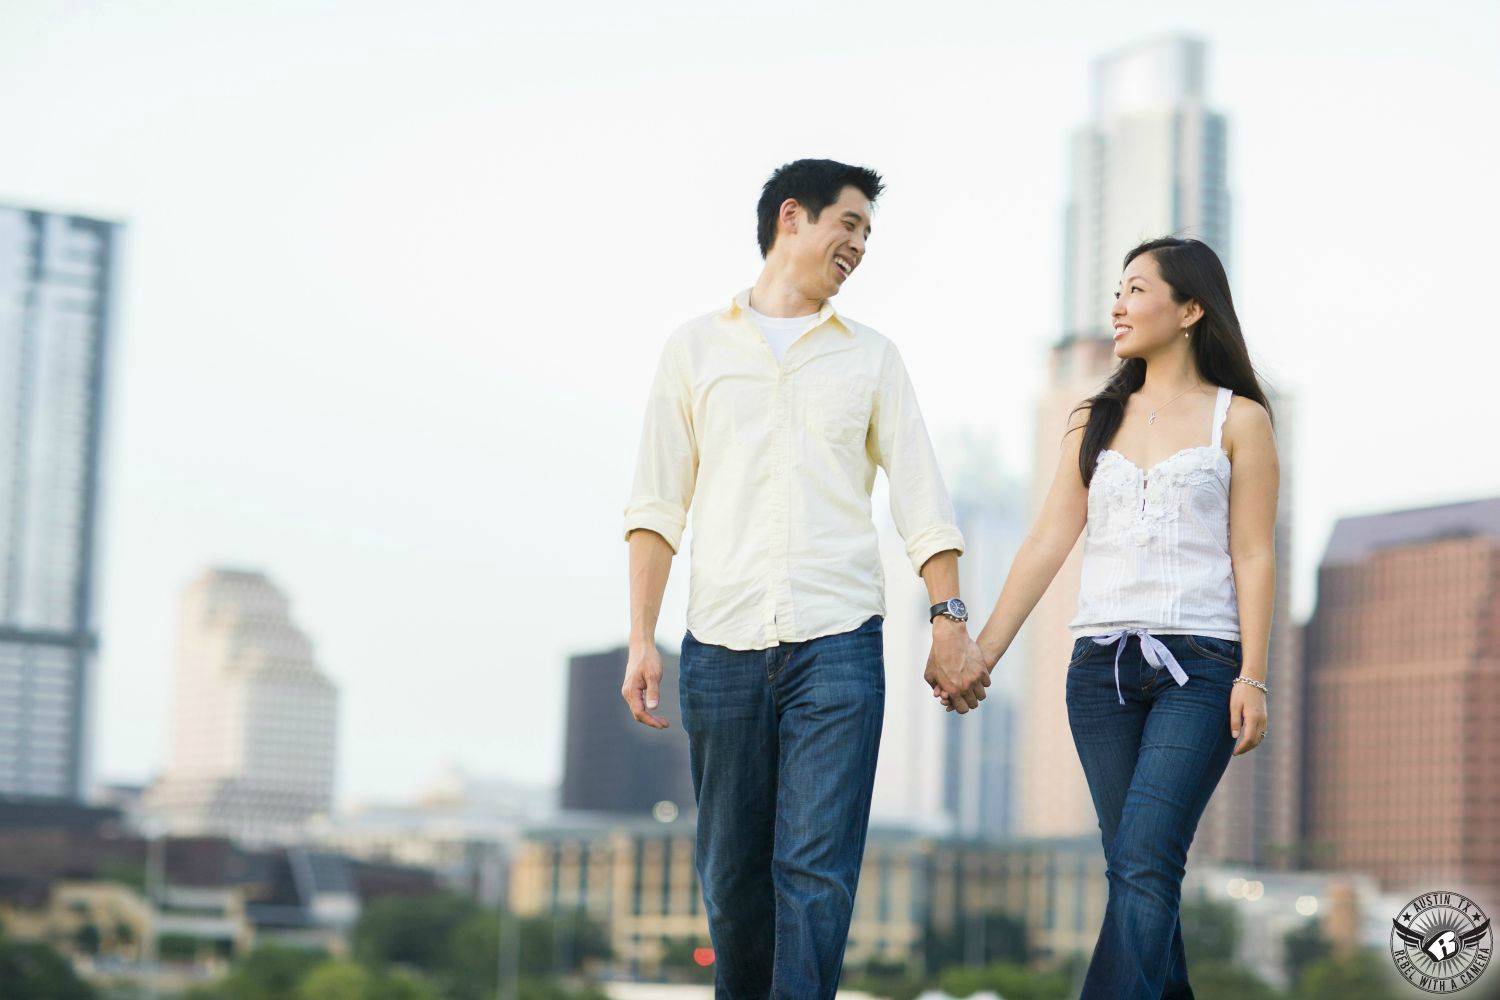 Petite Asian girl with long black hair wearing a white lacy tank top and hip hugger blue jeans holds hands with an Asian guy with dark spiky hair wearing a light yellow button up shirt with the sleeves rolled up and loose blue jeans walk near the Long Center the Austin high rise building in the background of this delightful engagement picture in Austin.